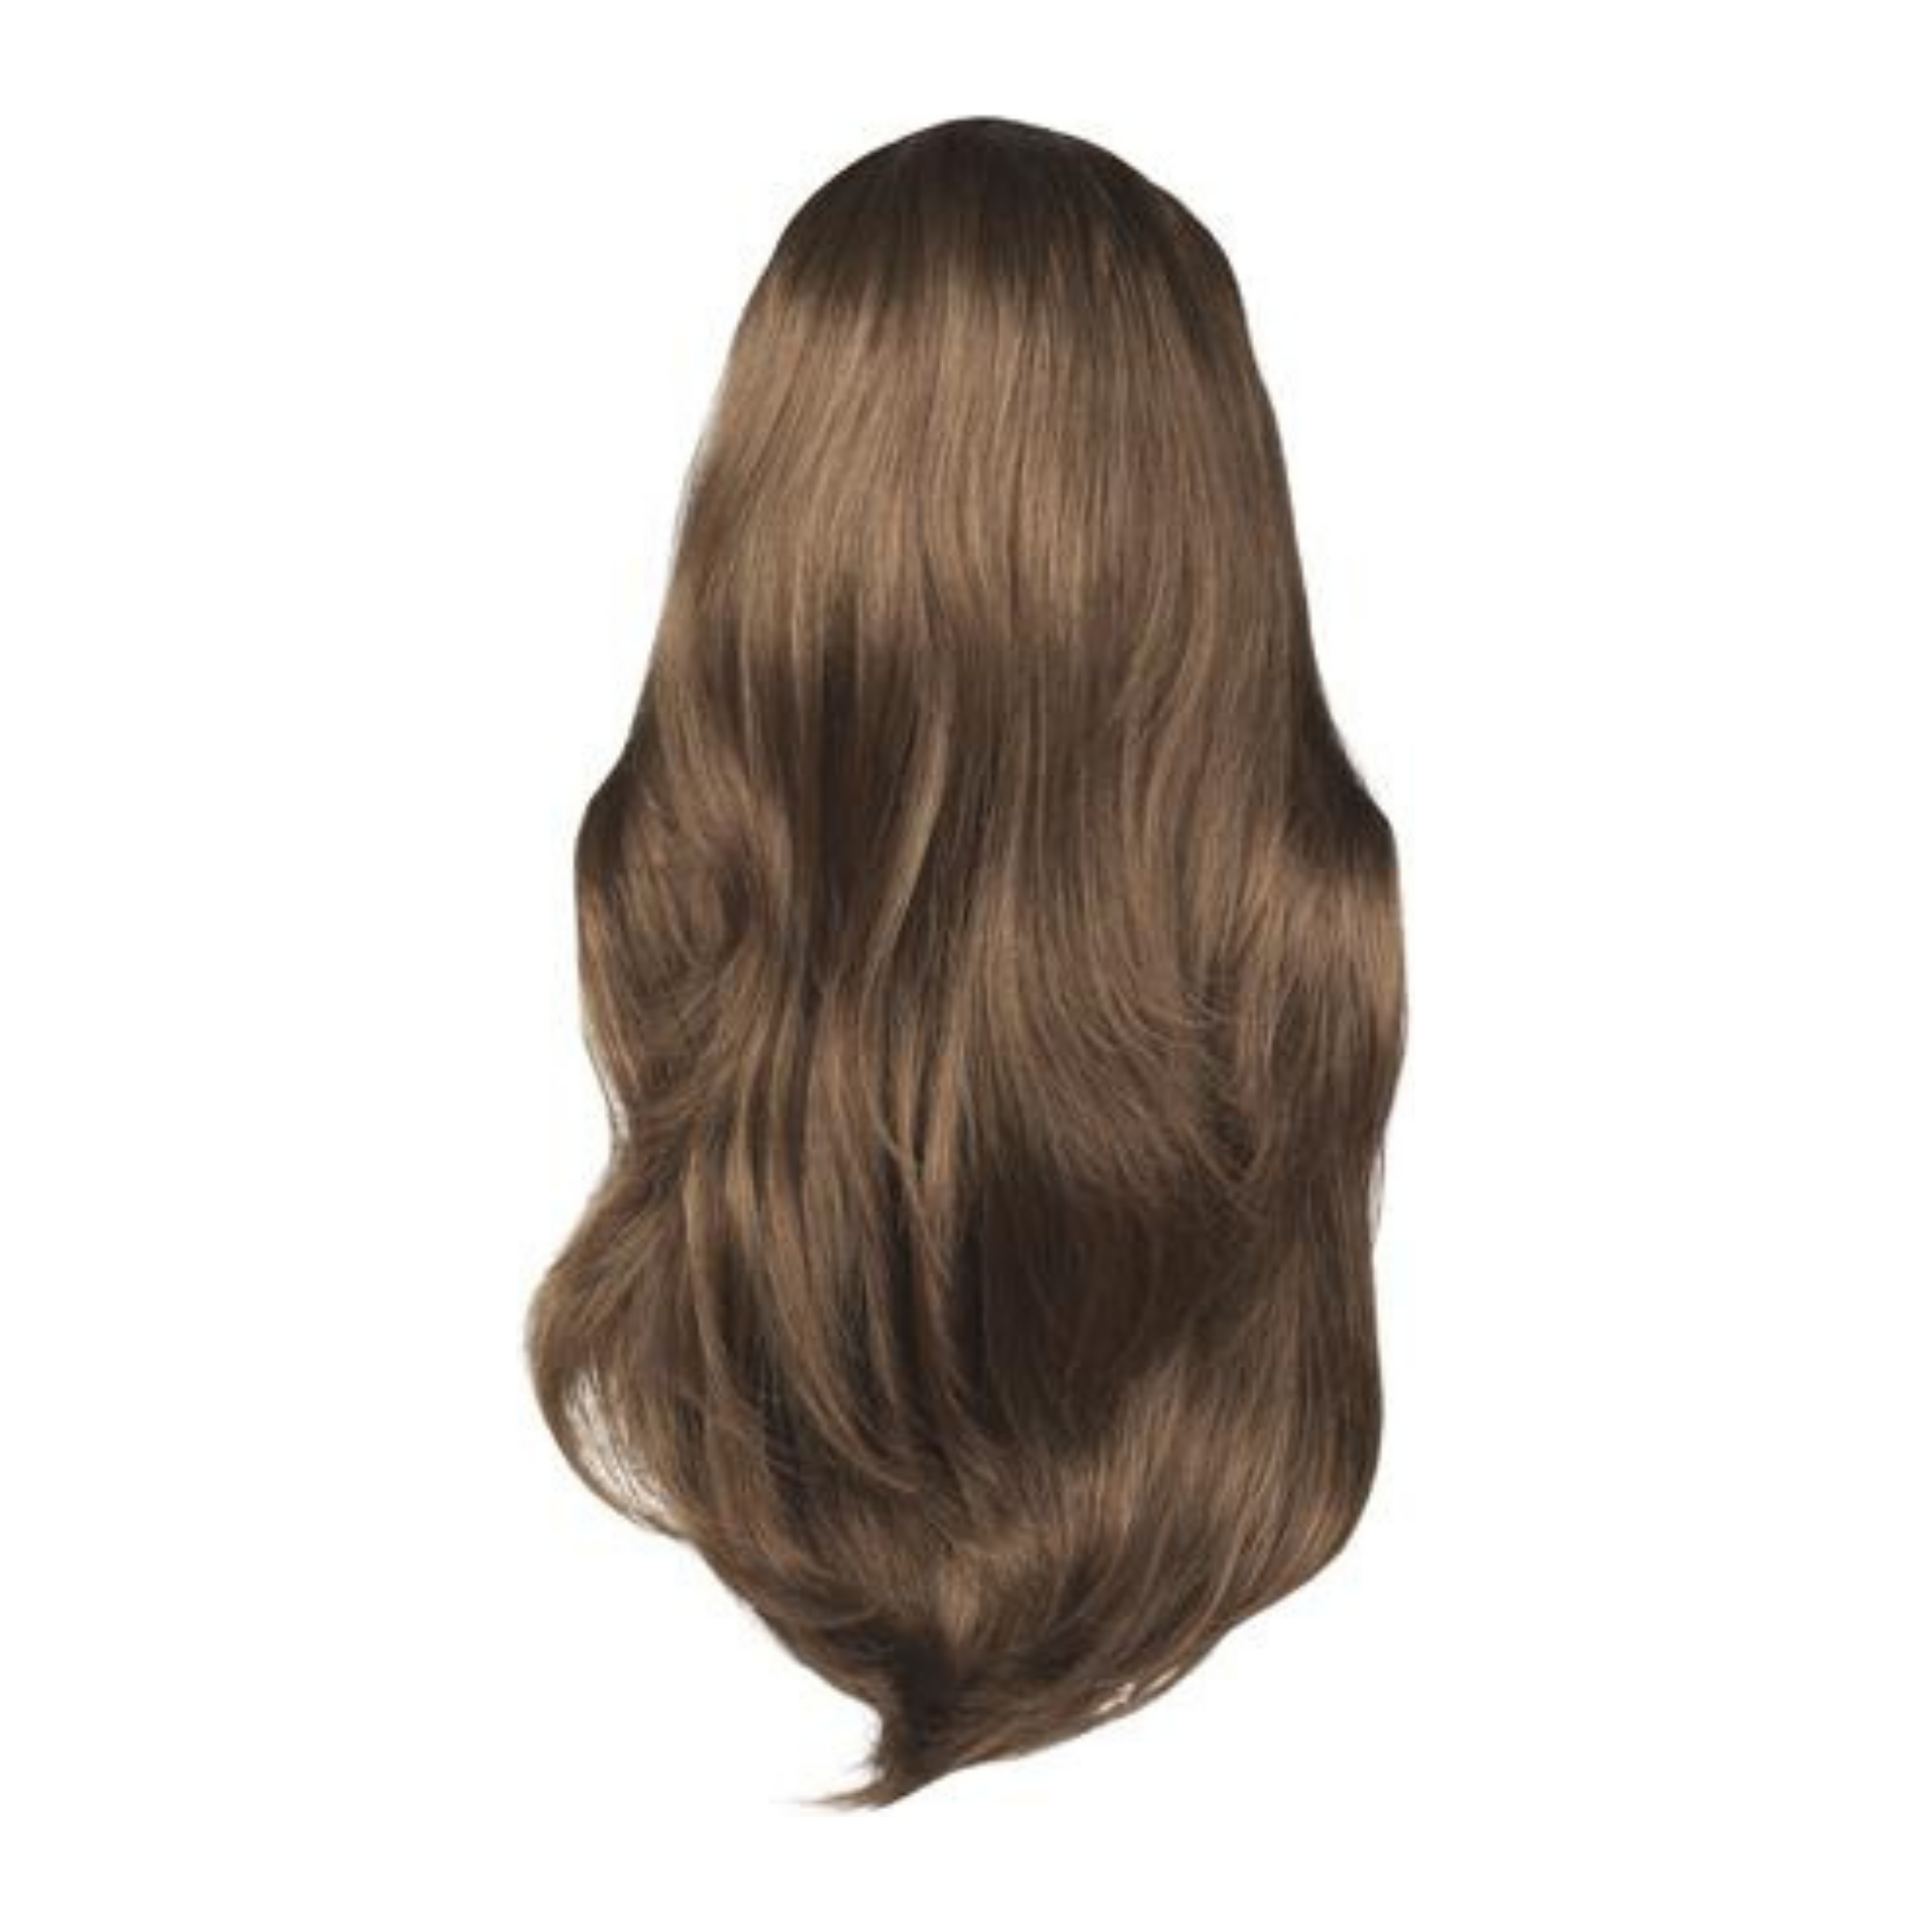 image of hair rehab london half wig hairpiece in shade chestnut